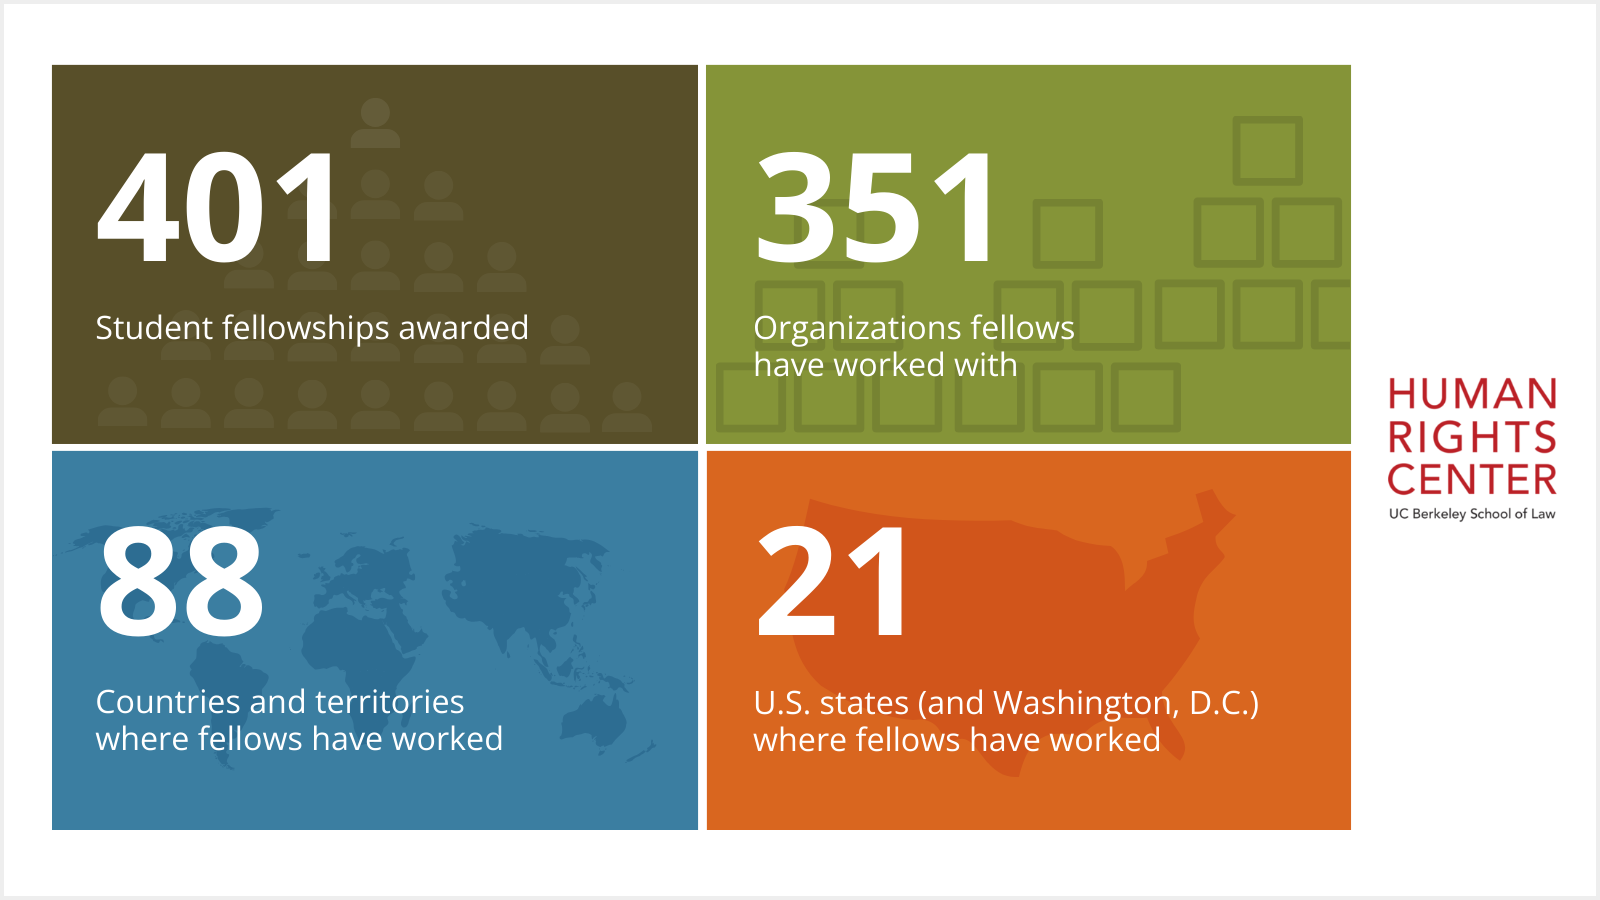 Human Rights Center, UC Berkeley school of Law Infographic: 401 Student Fellowships Awarded; 351 Organizations Fellows Have Worked With; 88 Countries and Territories Where They